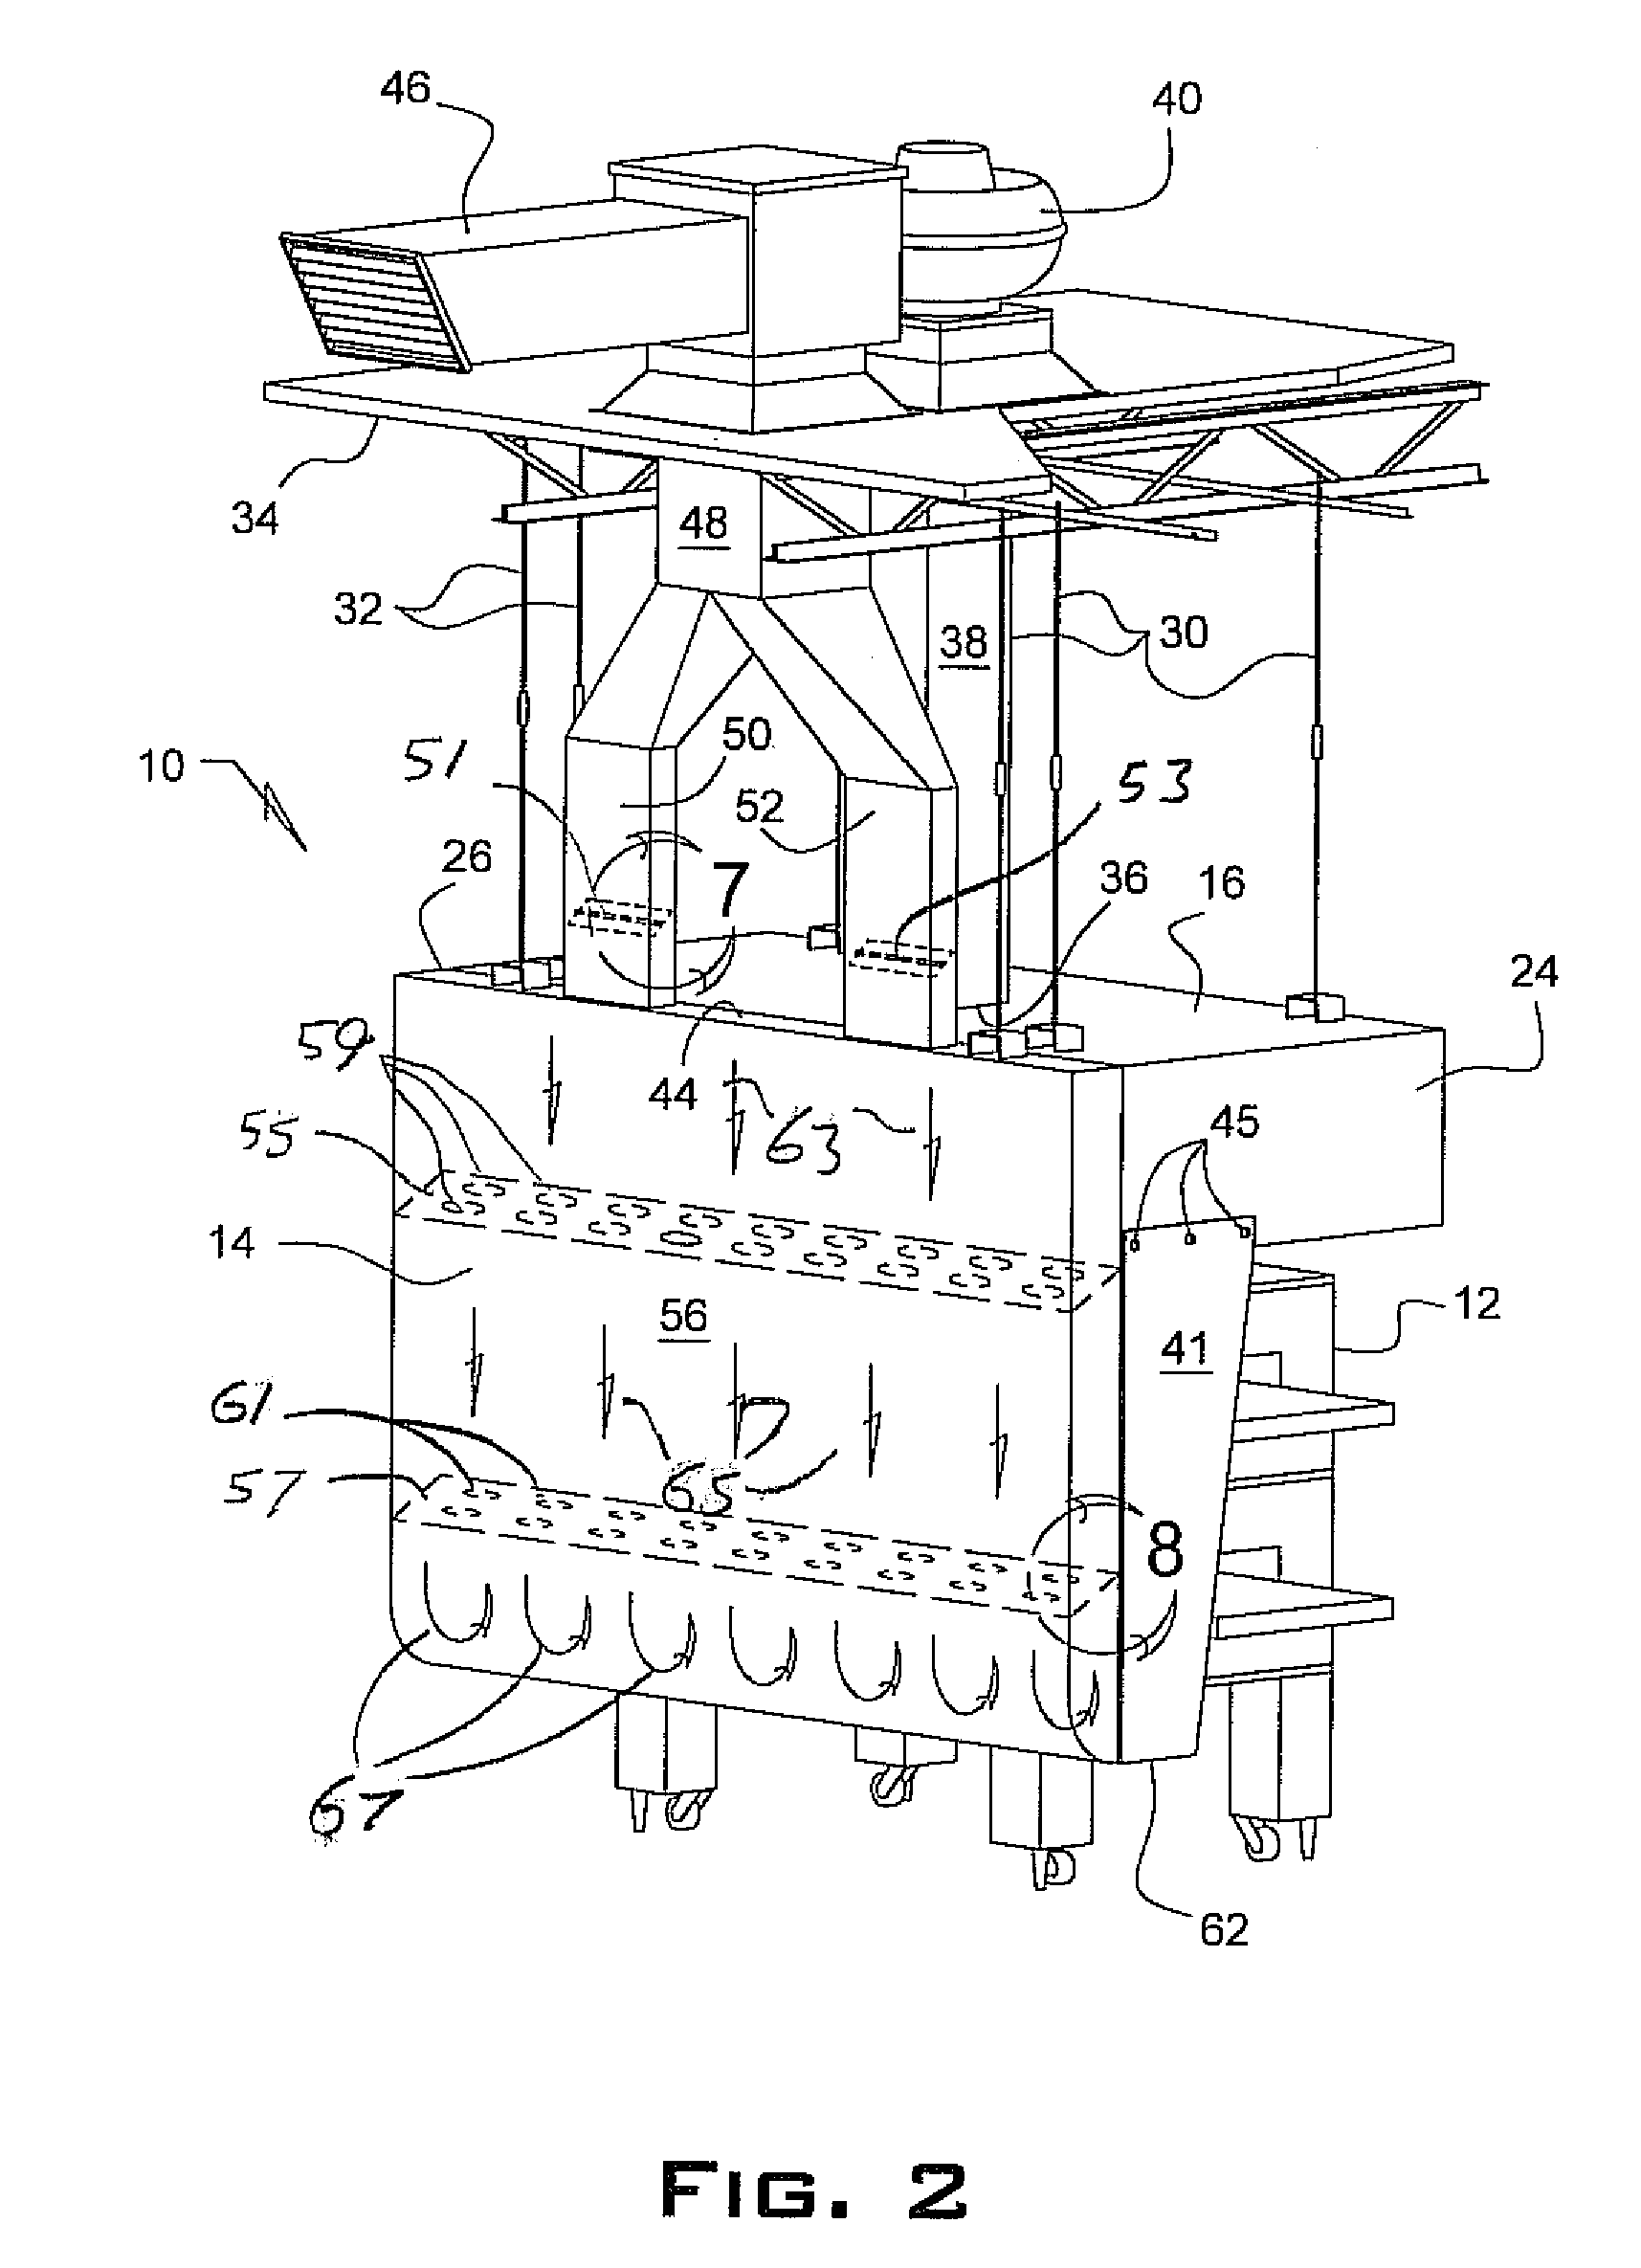 Overhead ventilation system incorporating a downwardly configured rear supply plenum with upward configured directional outlet and including baffle plates and dampeners incorporated into the plenum for evenly distributing an inlet airflow through the plenum outlet